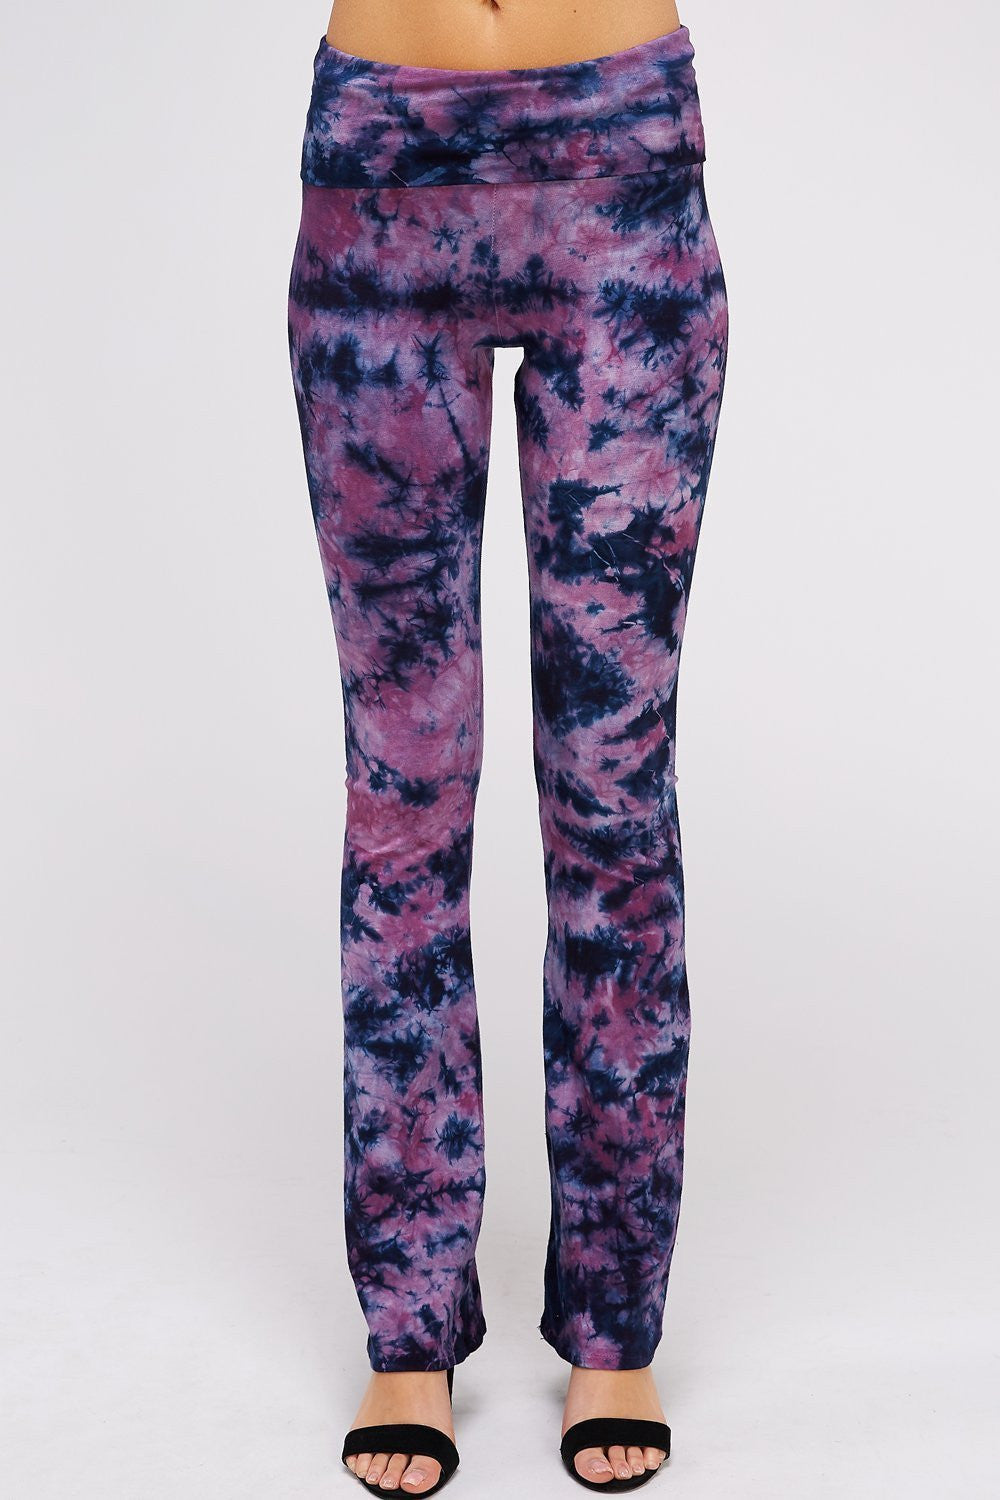 Navy & Purple Bamboo Tie dye straight-leg yoga pant fit is comfortable and flattering